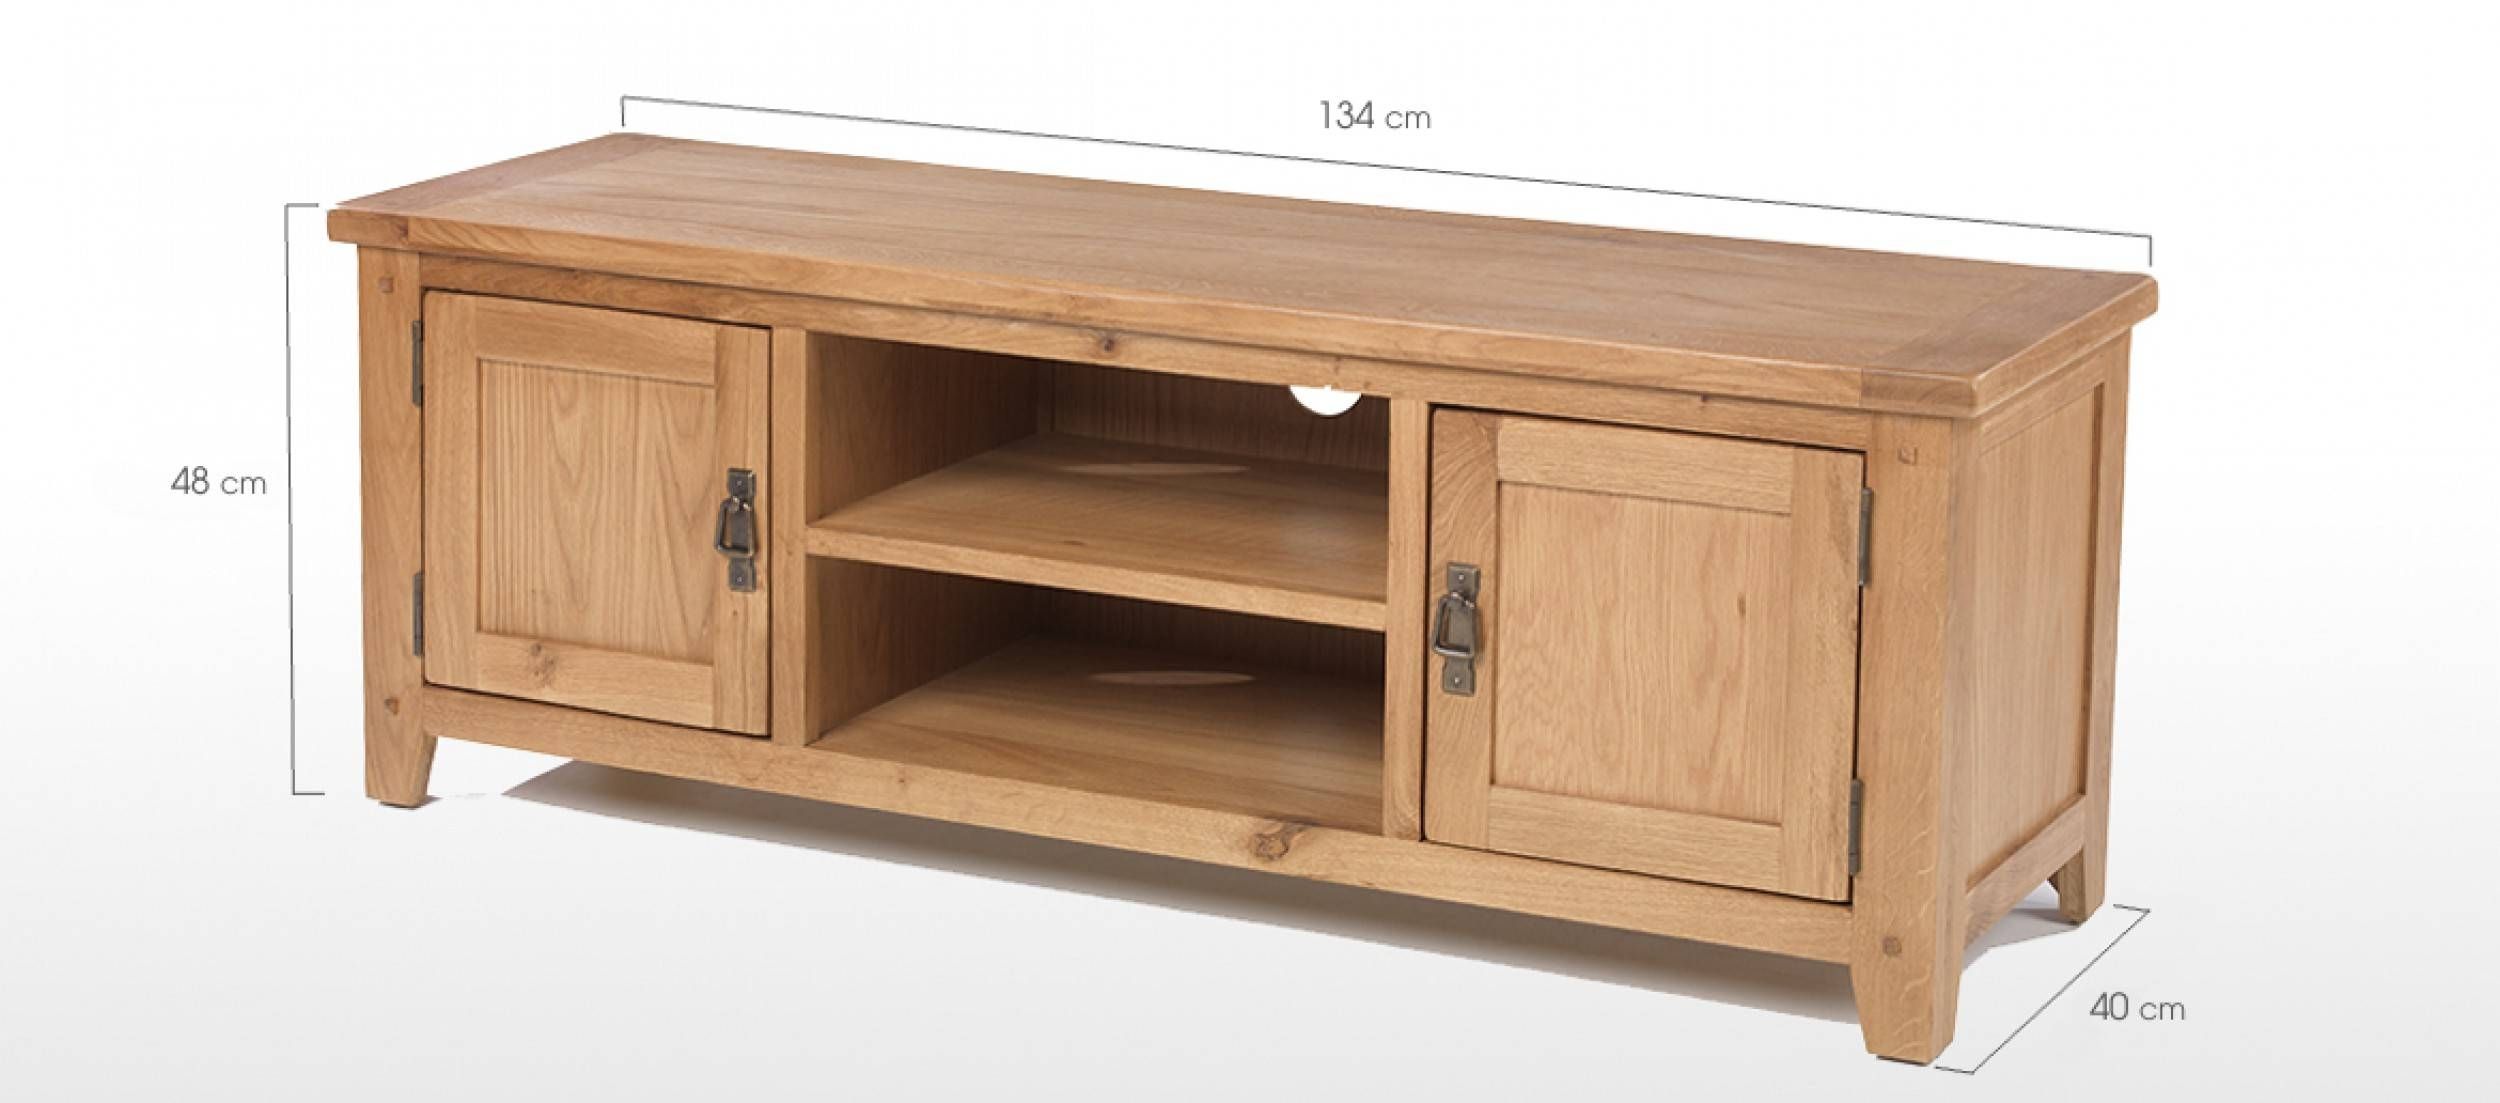 Rustic Oak Plasma Tv Stand | Quercus Living Within Large Oak Tv Stands (View 7 of 15)